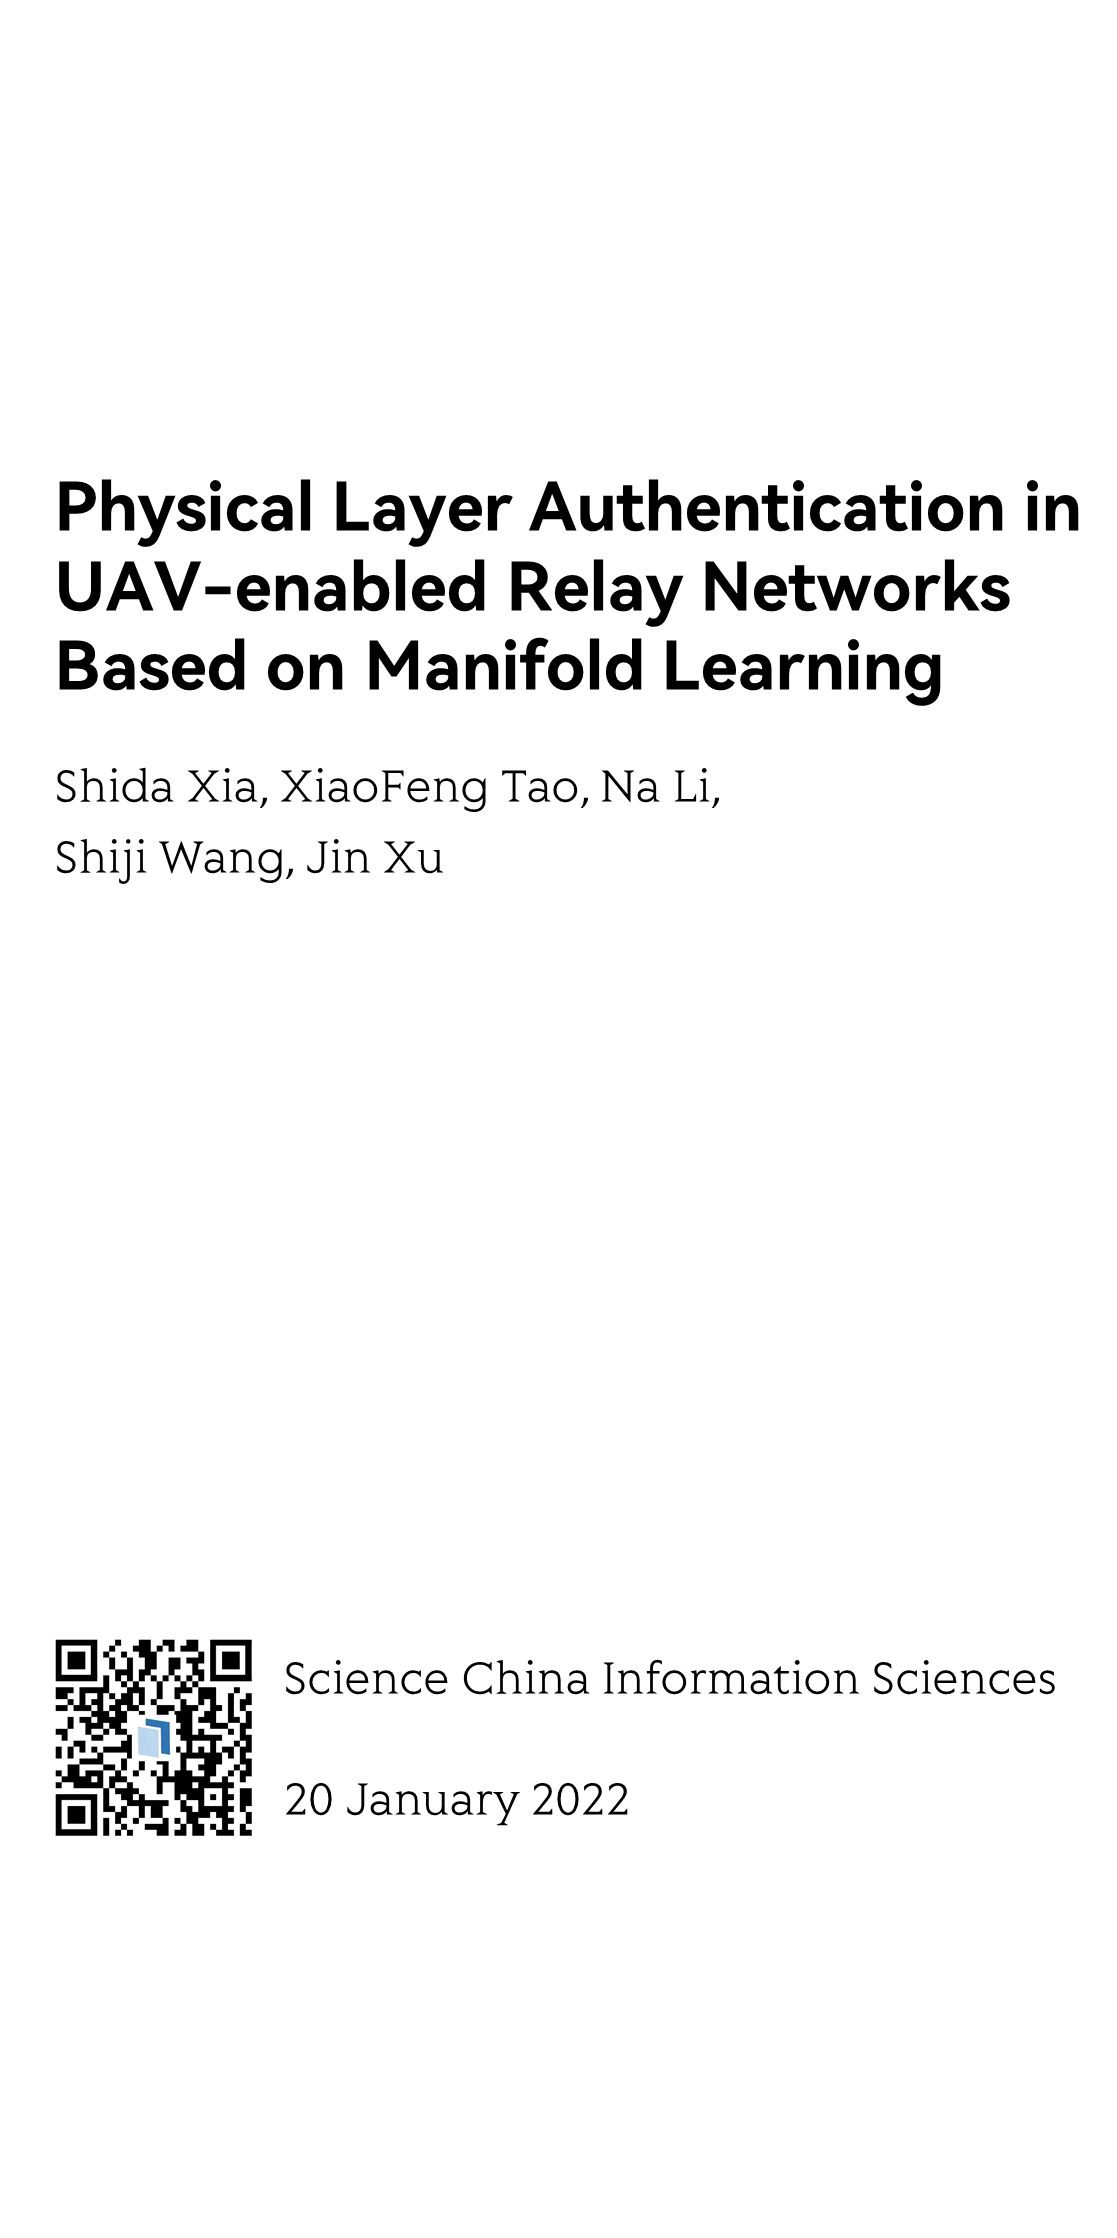 Physical Layer Authentication in UAV-enabled Relay Networks Based on Manifold Learning_1